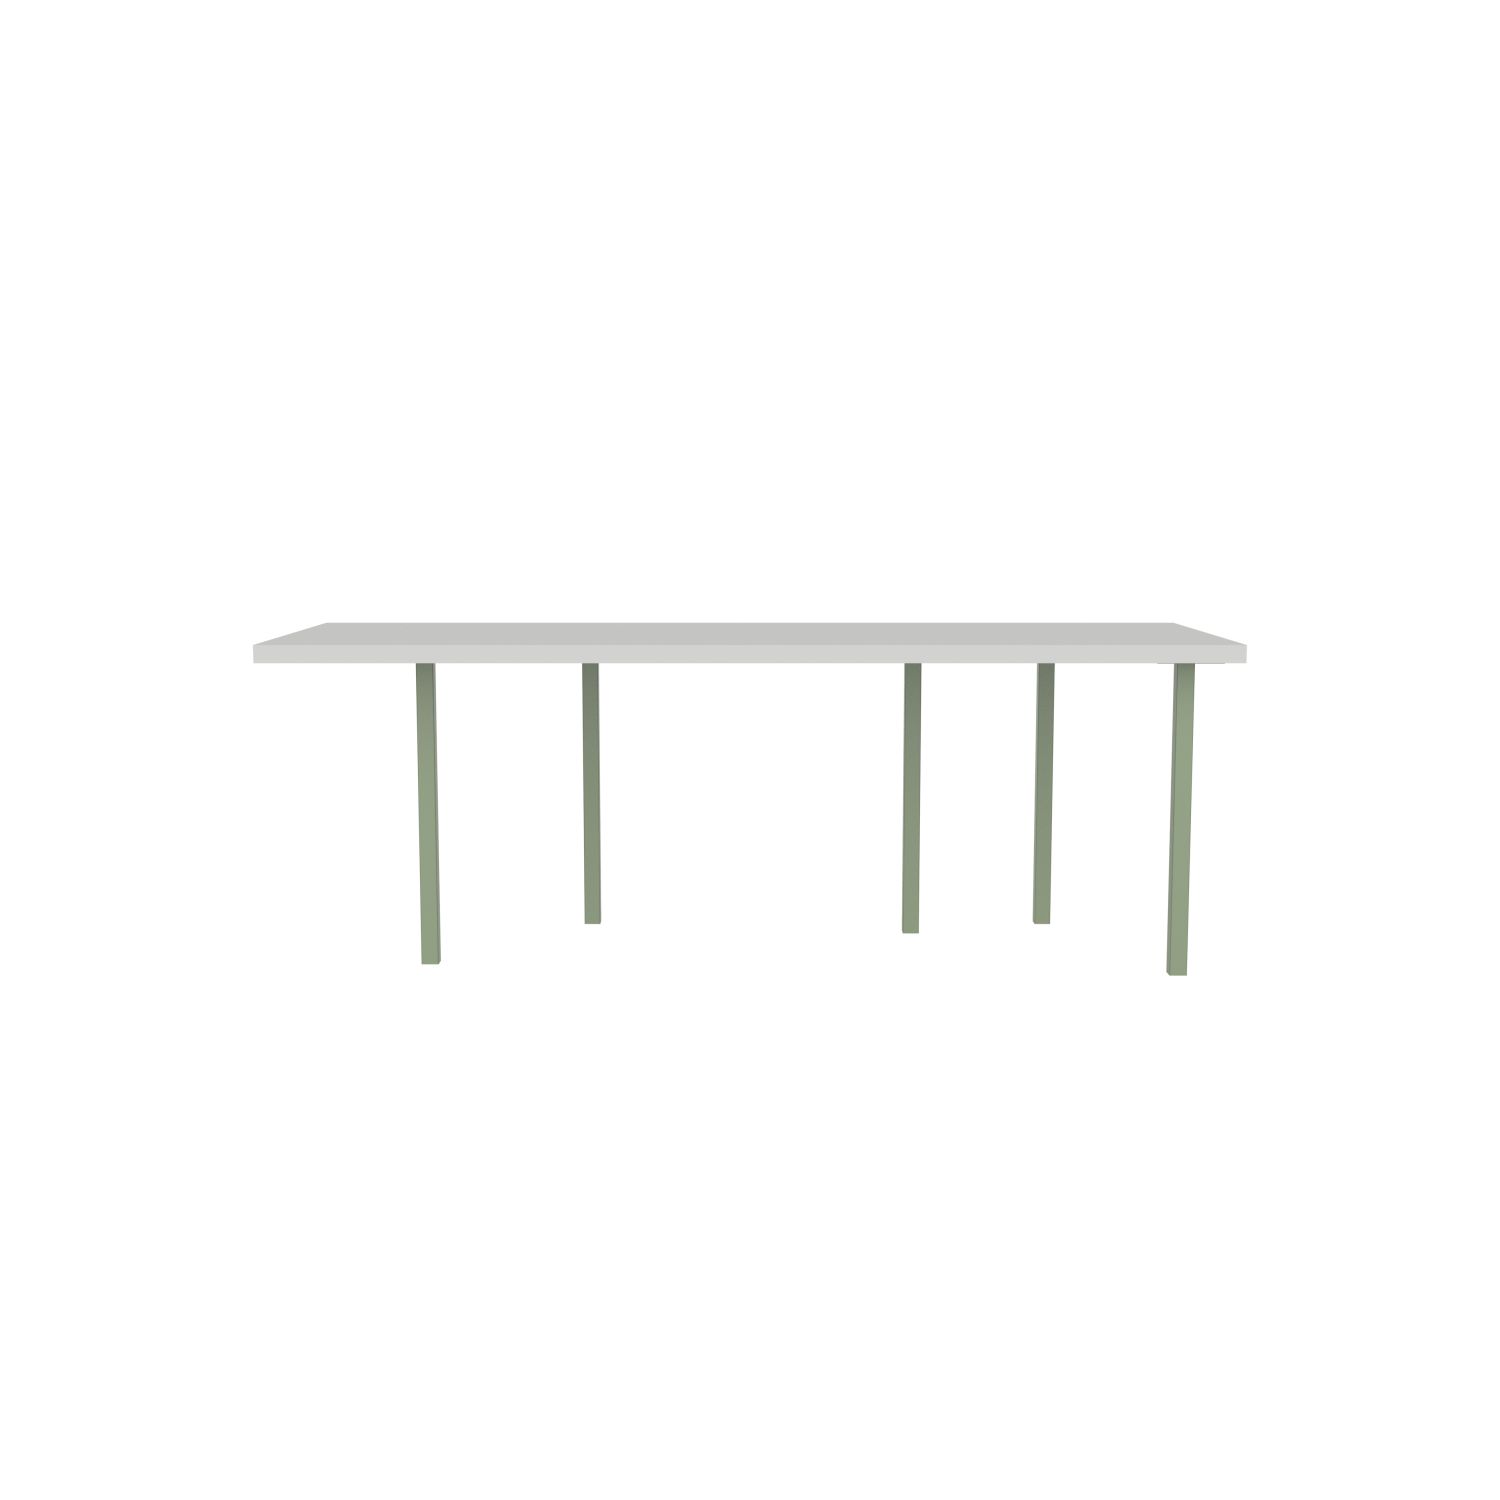 lensvelt bbrand table five fixed heigt 80x218 hpl boring grey 50 mm price level 1 green ral6021